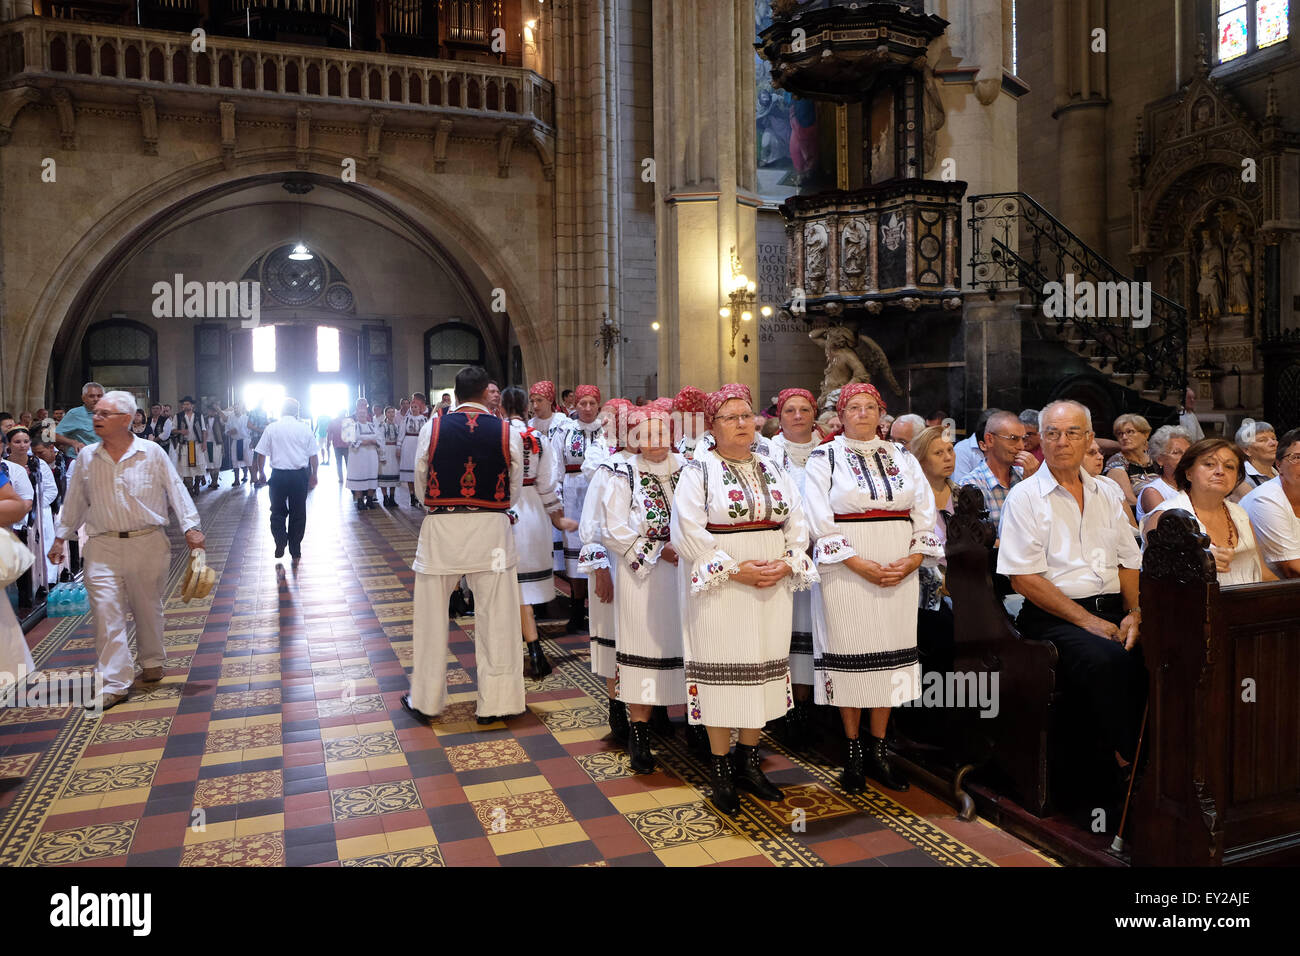 Participants in the 49th International Folklore Festival at Sunday Mass in the Zagreb cathedral, Croatia Stock Photo